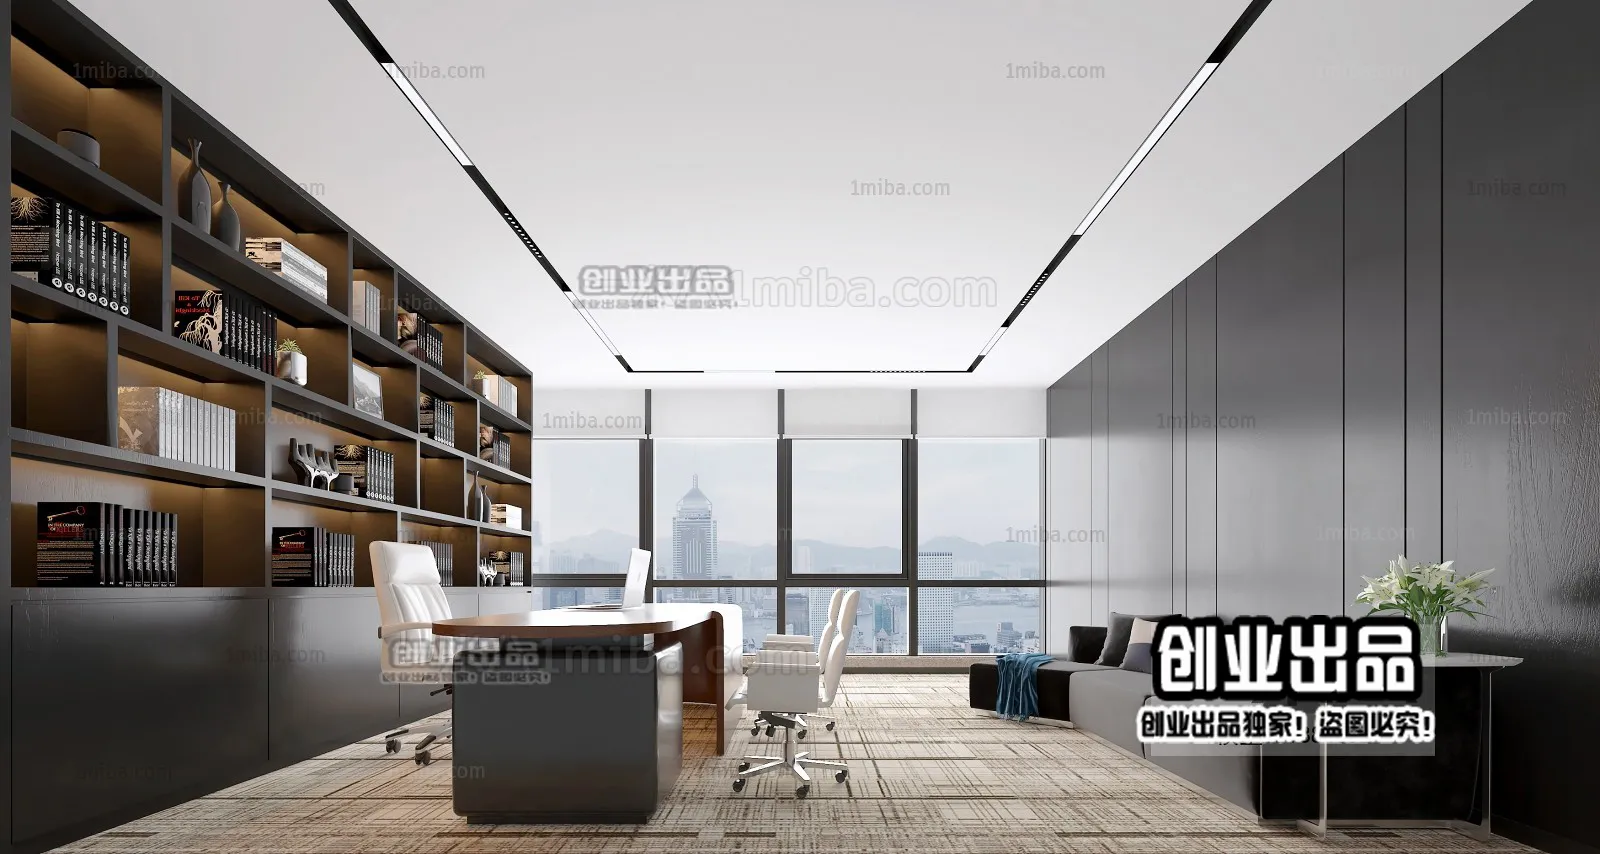 3D OFFICE INTERIOR (VRAY) – MANAGER ROOM 3D SCENES – 018